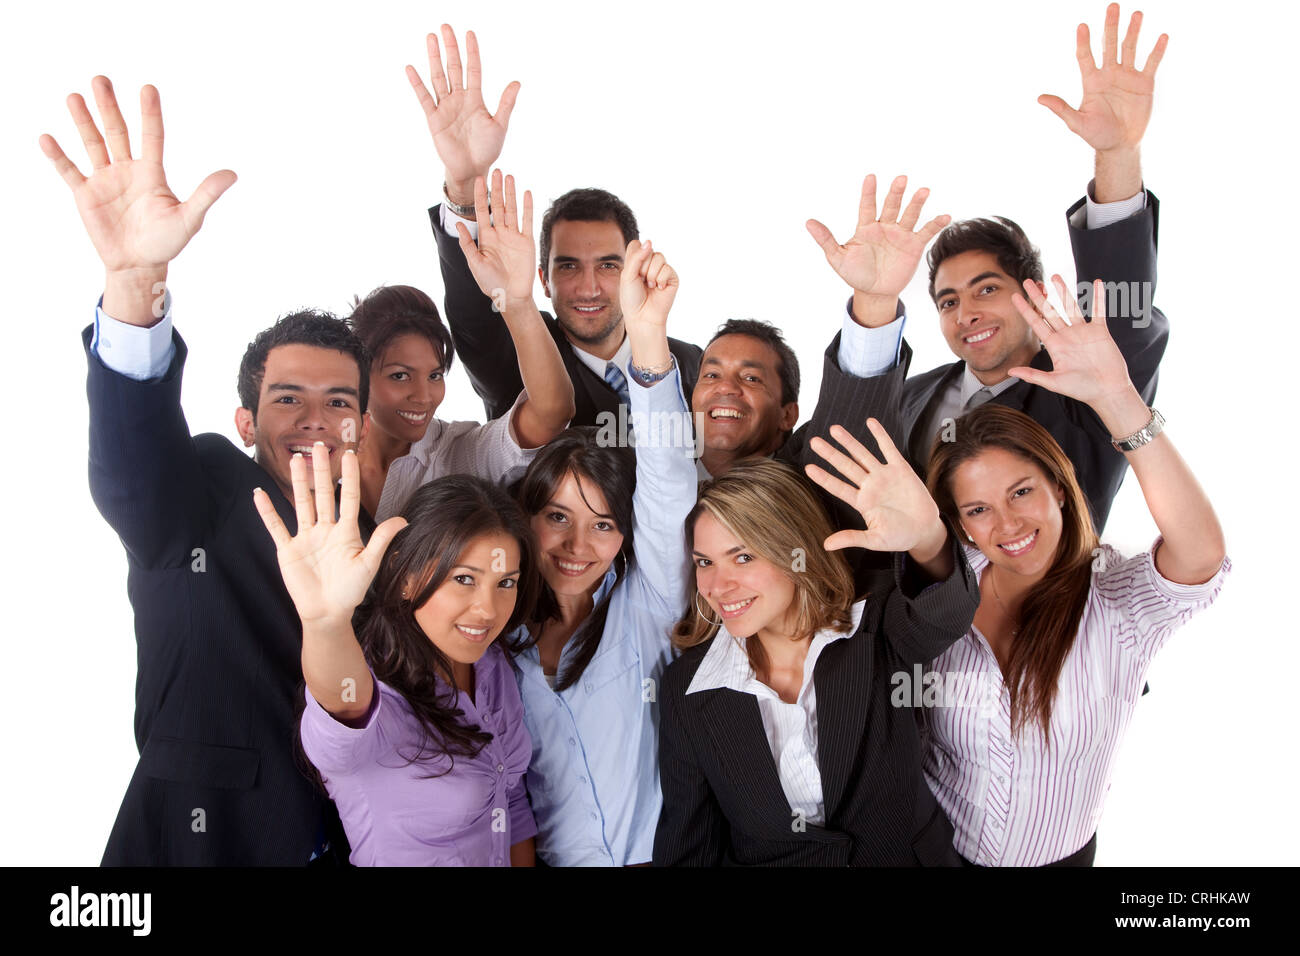 group of happy business people waving Stock Photo